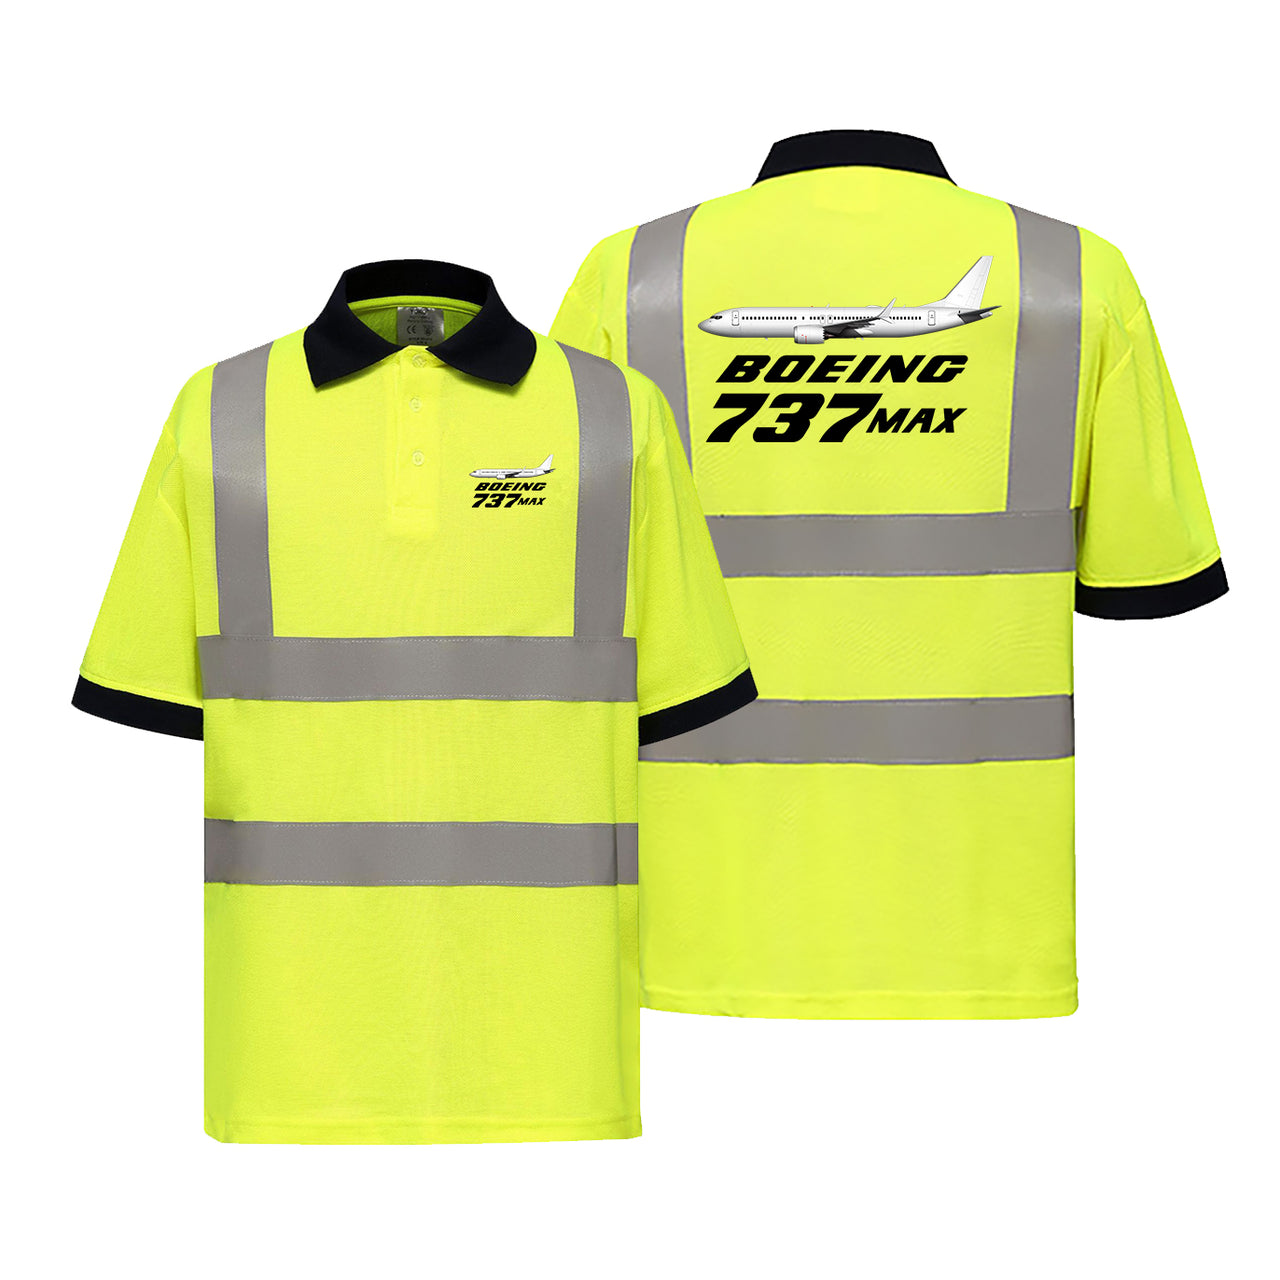 The Boeing 737Max Designed Reflective Polo T-Shirts